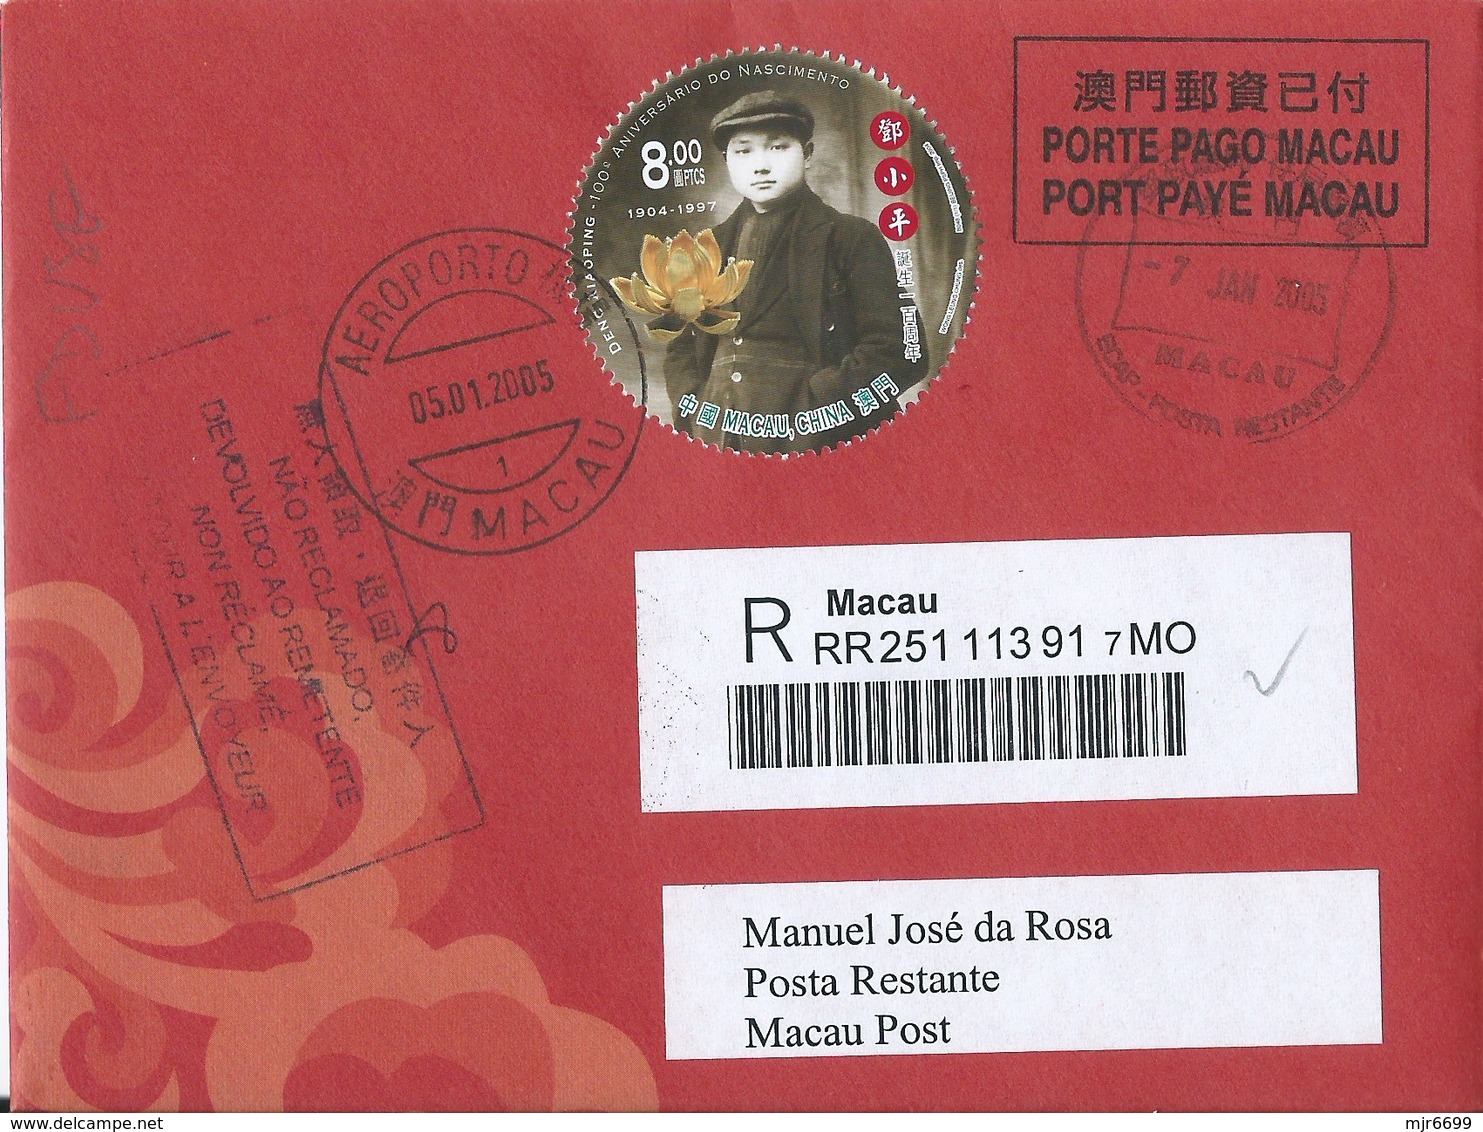 MACAU 2005 LUNAR NEW YEAR OF THE COCK GREETING CARD & POSTAGE PAID REG COVER 1ST DAY LOCAL USAGE - Postal Stationery